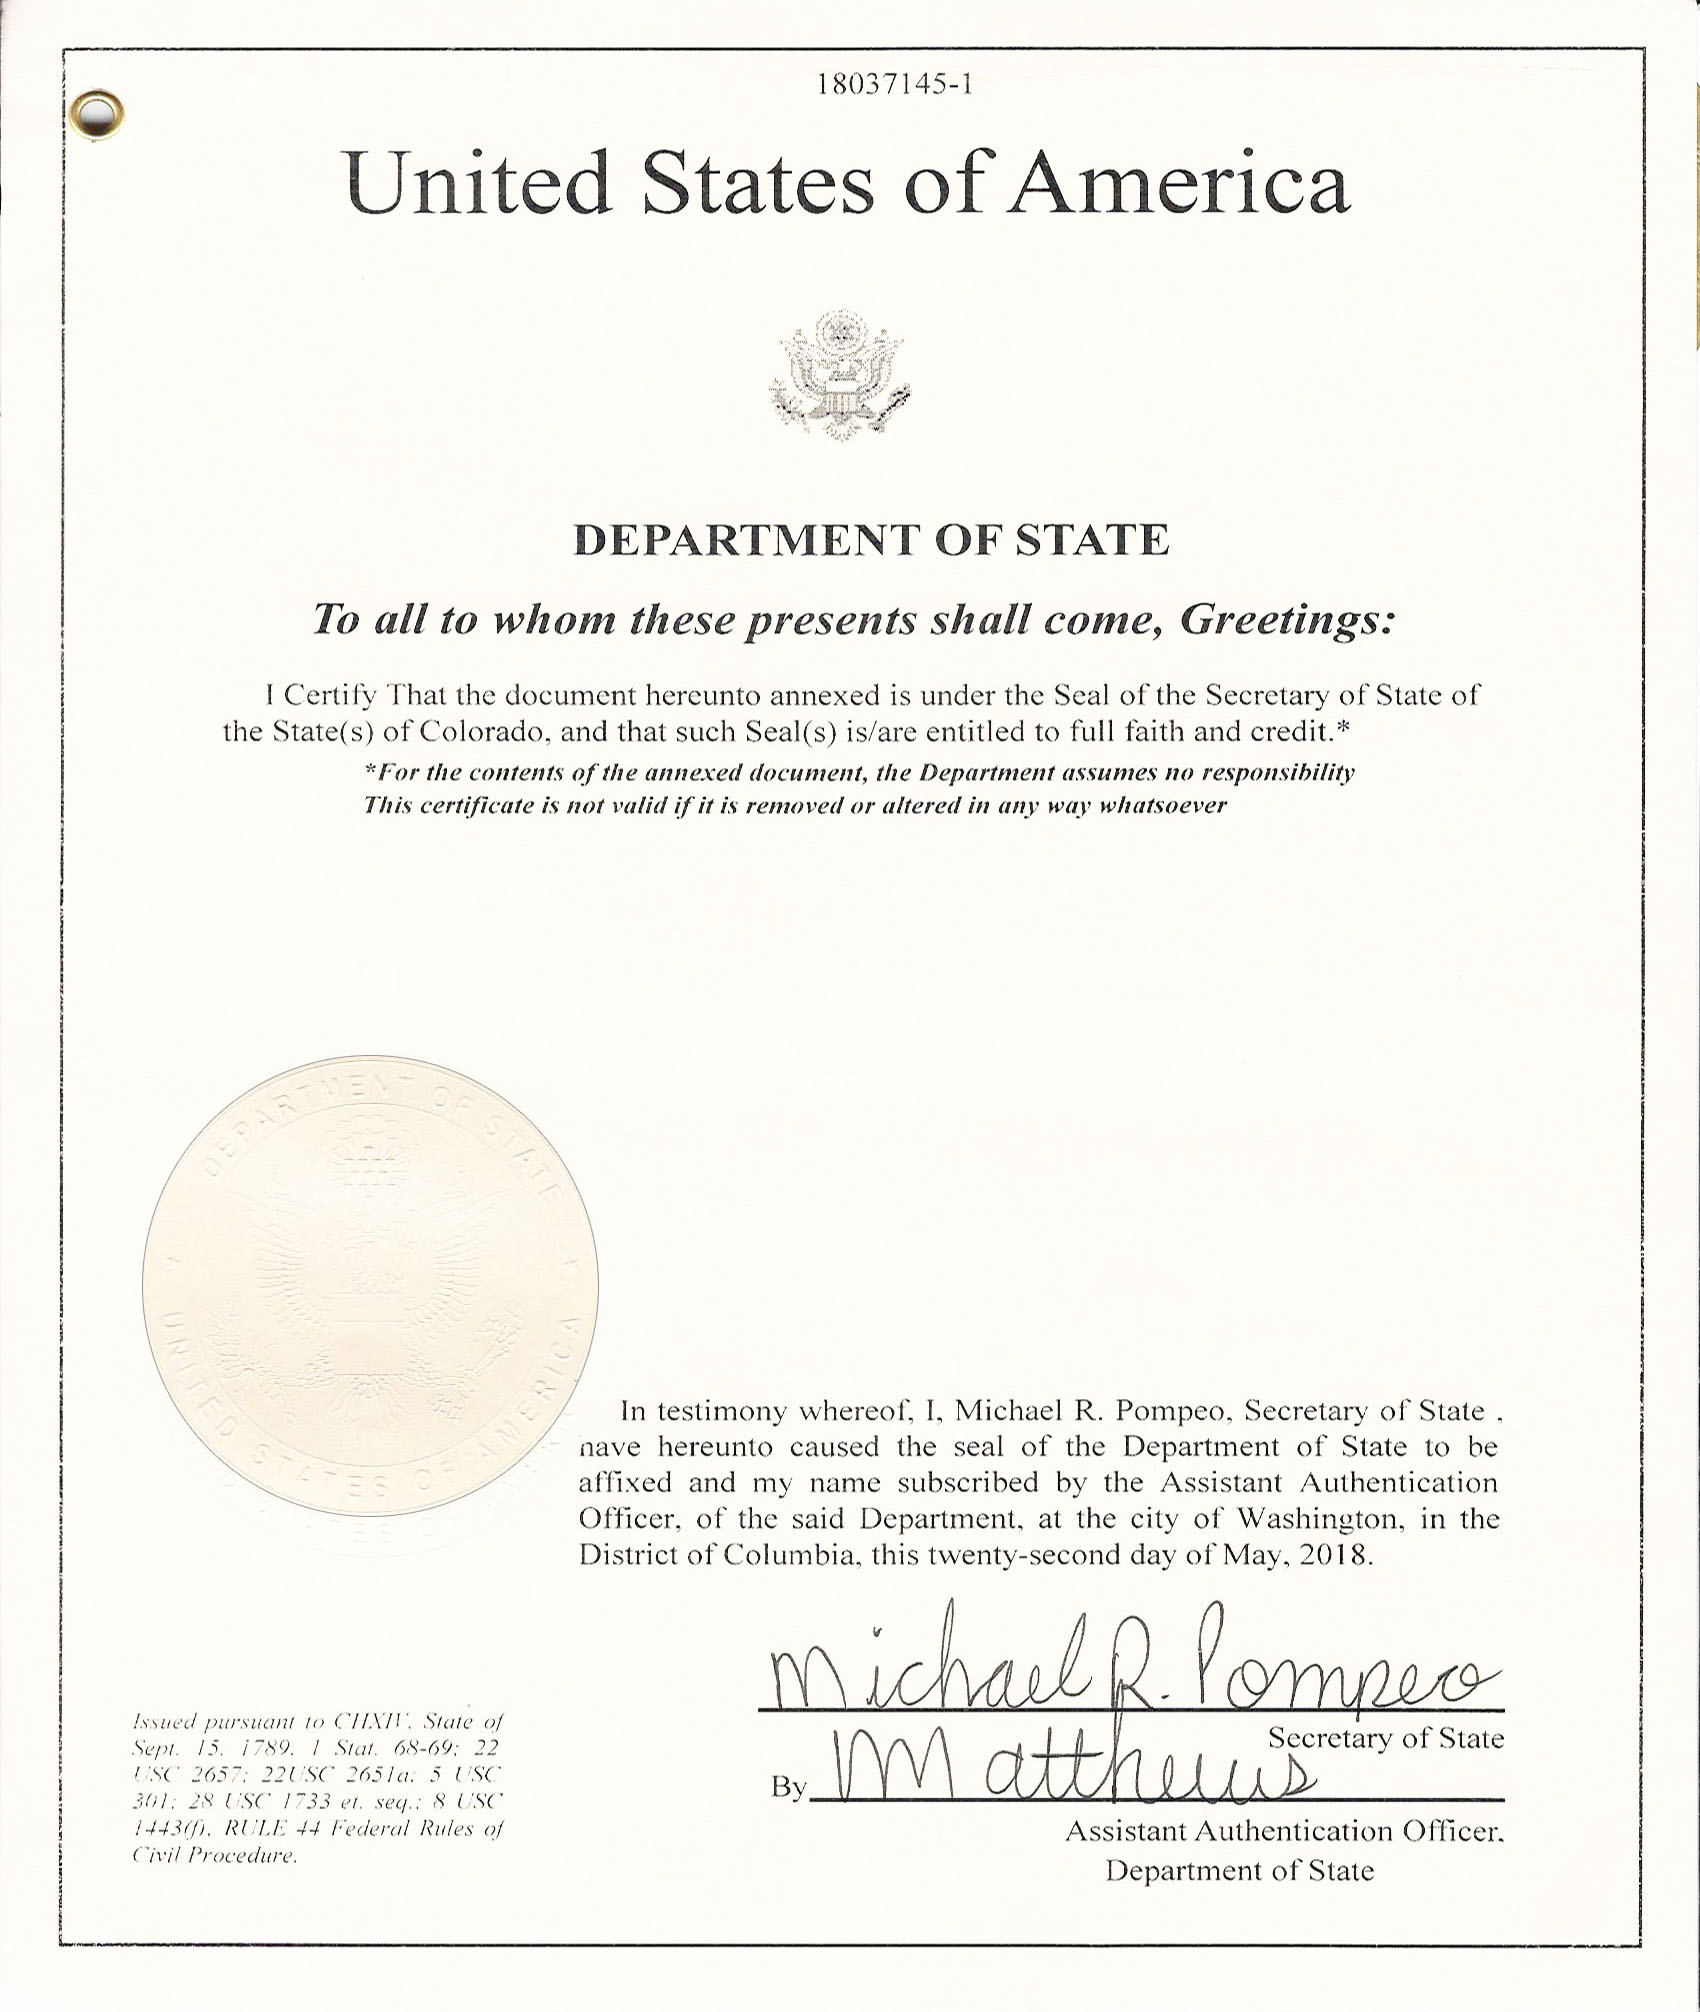 My document is authenticated by the U.S. Department of State